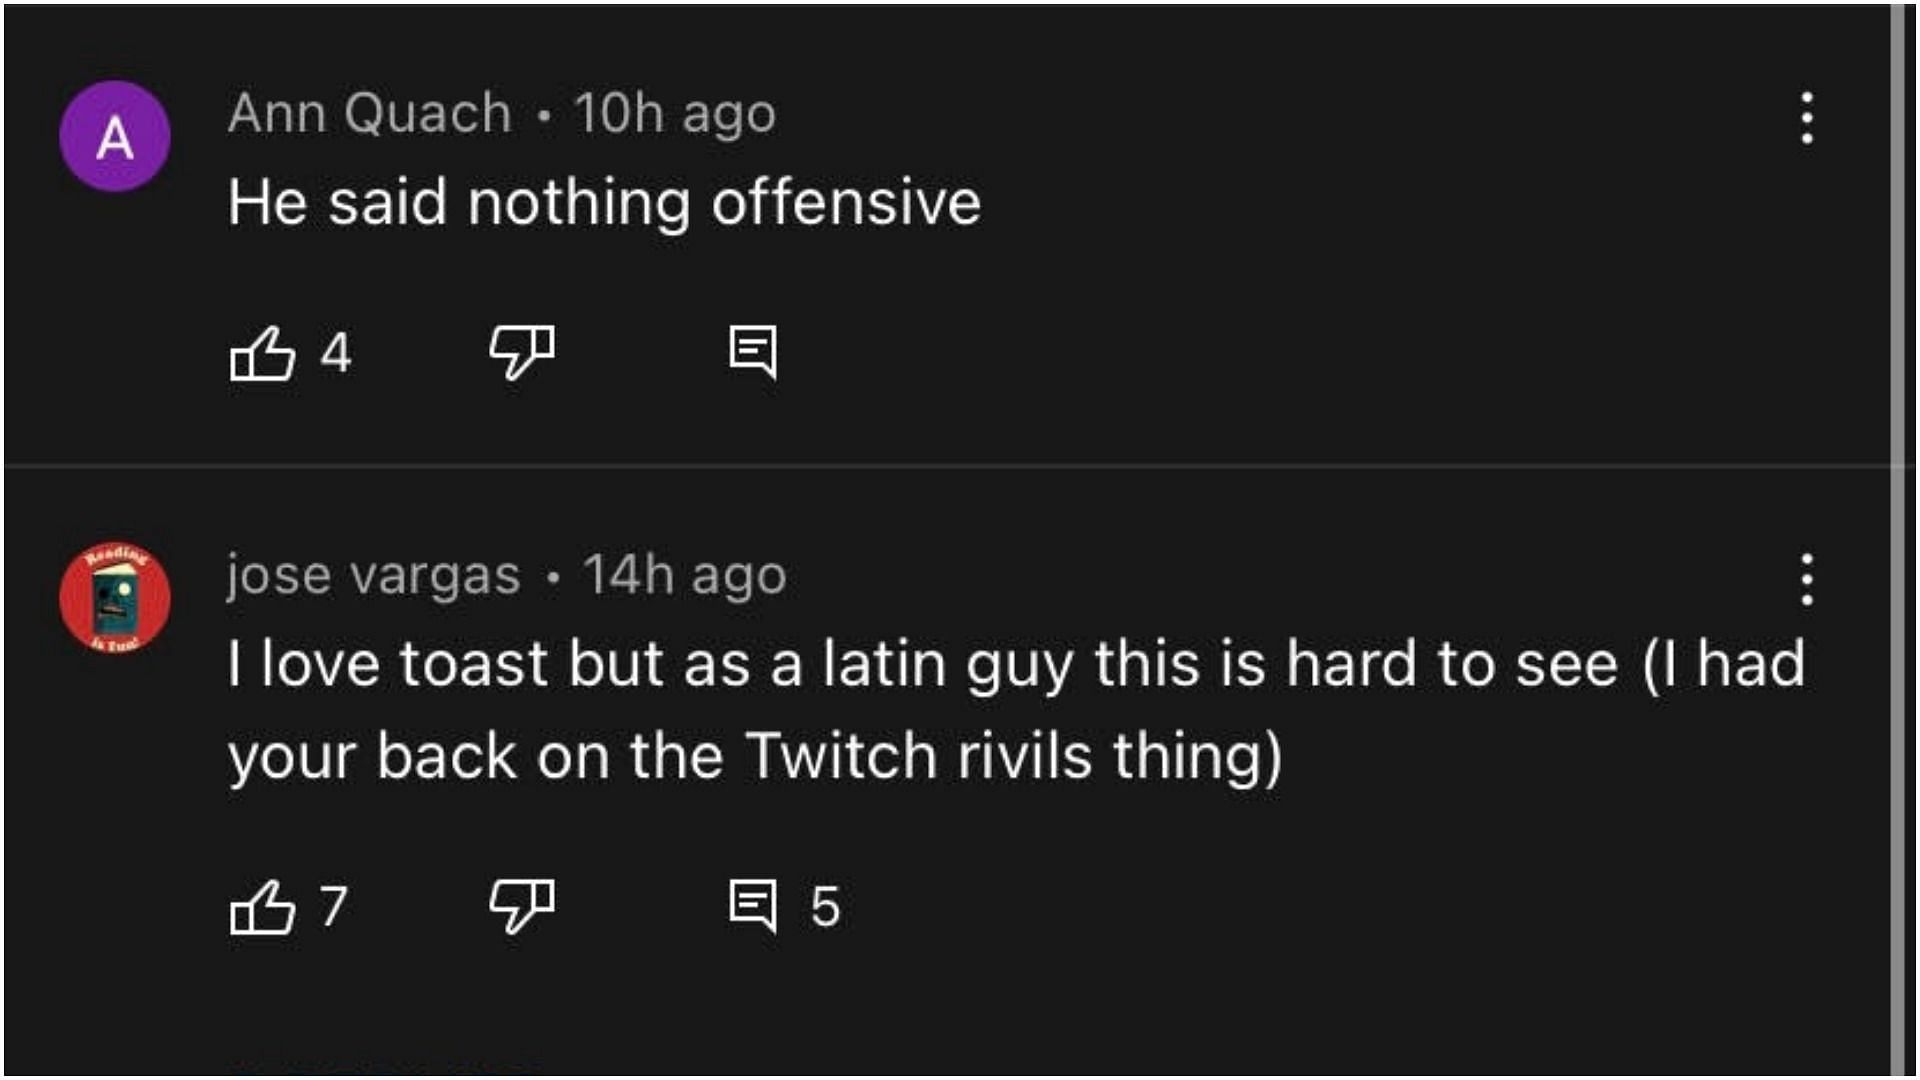 Commenters were split on whether what Toast said could be considered offensive (Image via YouTube)